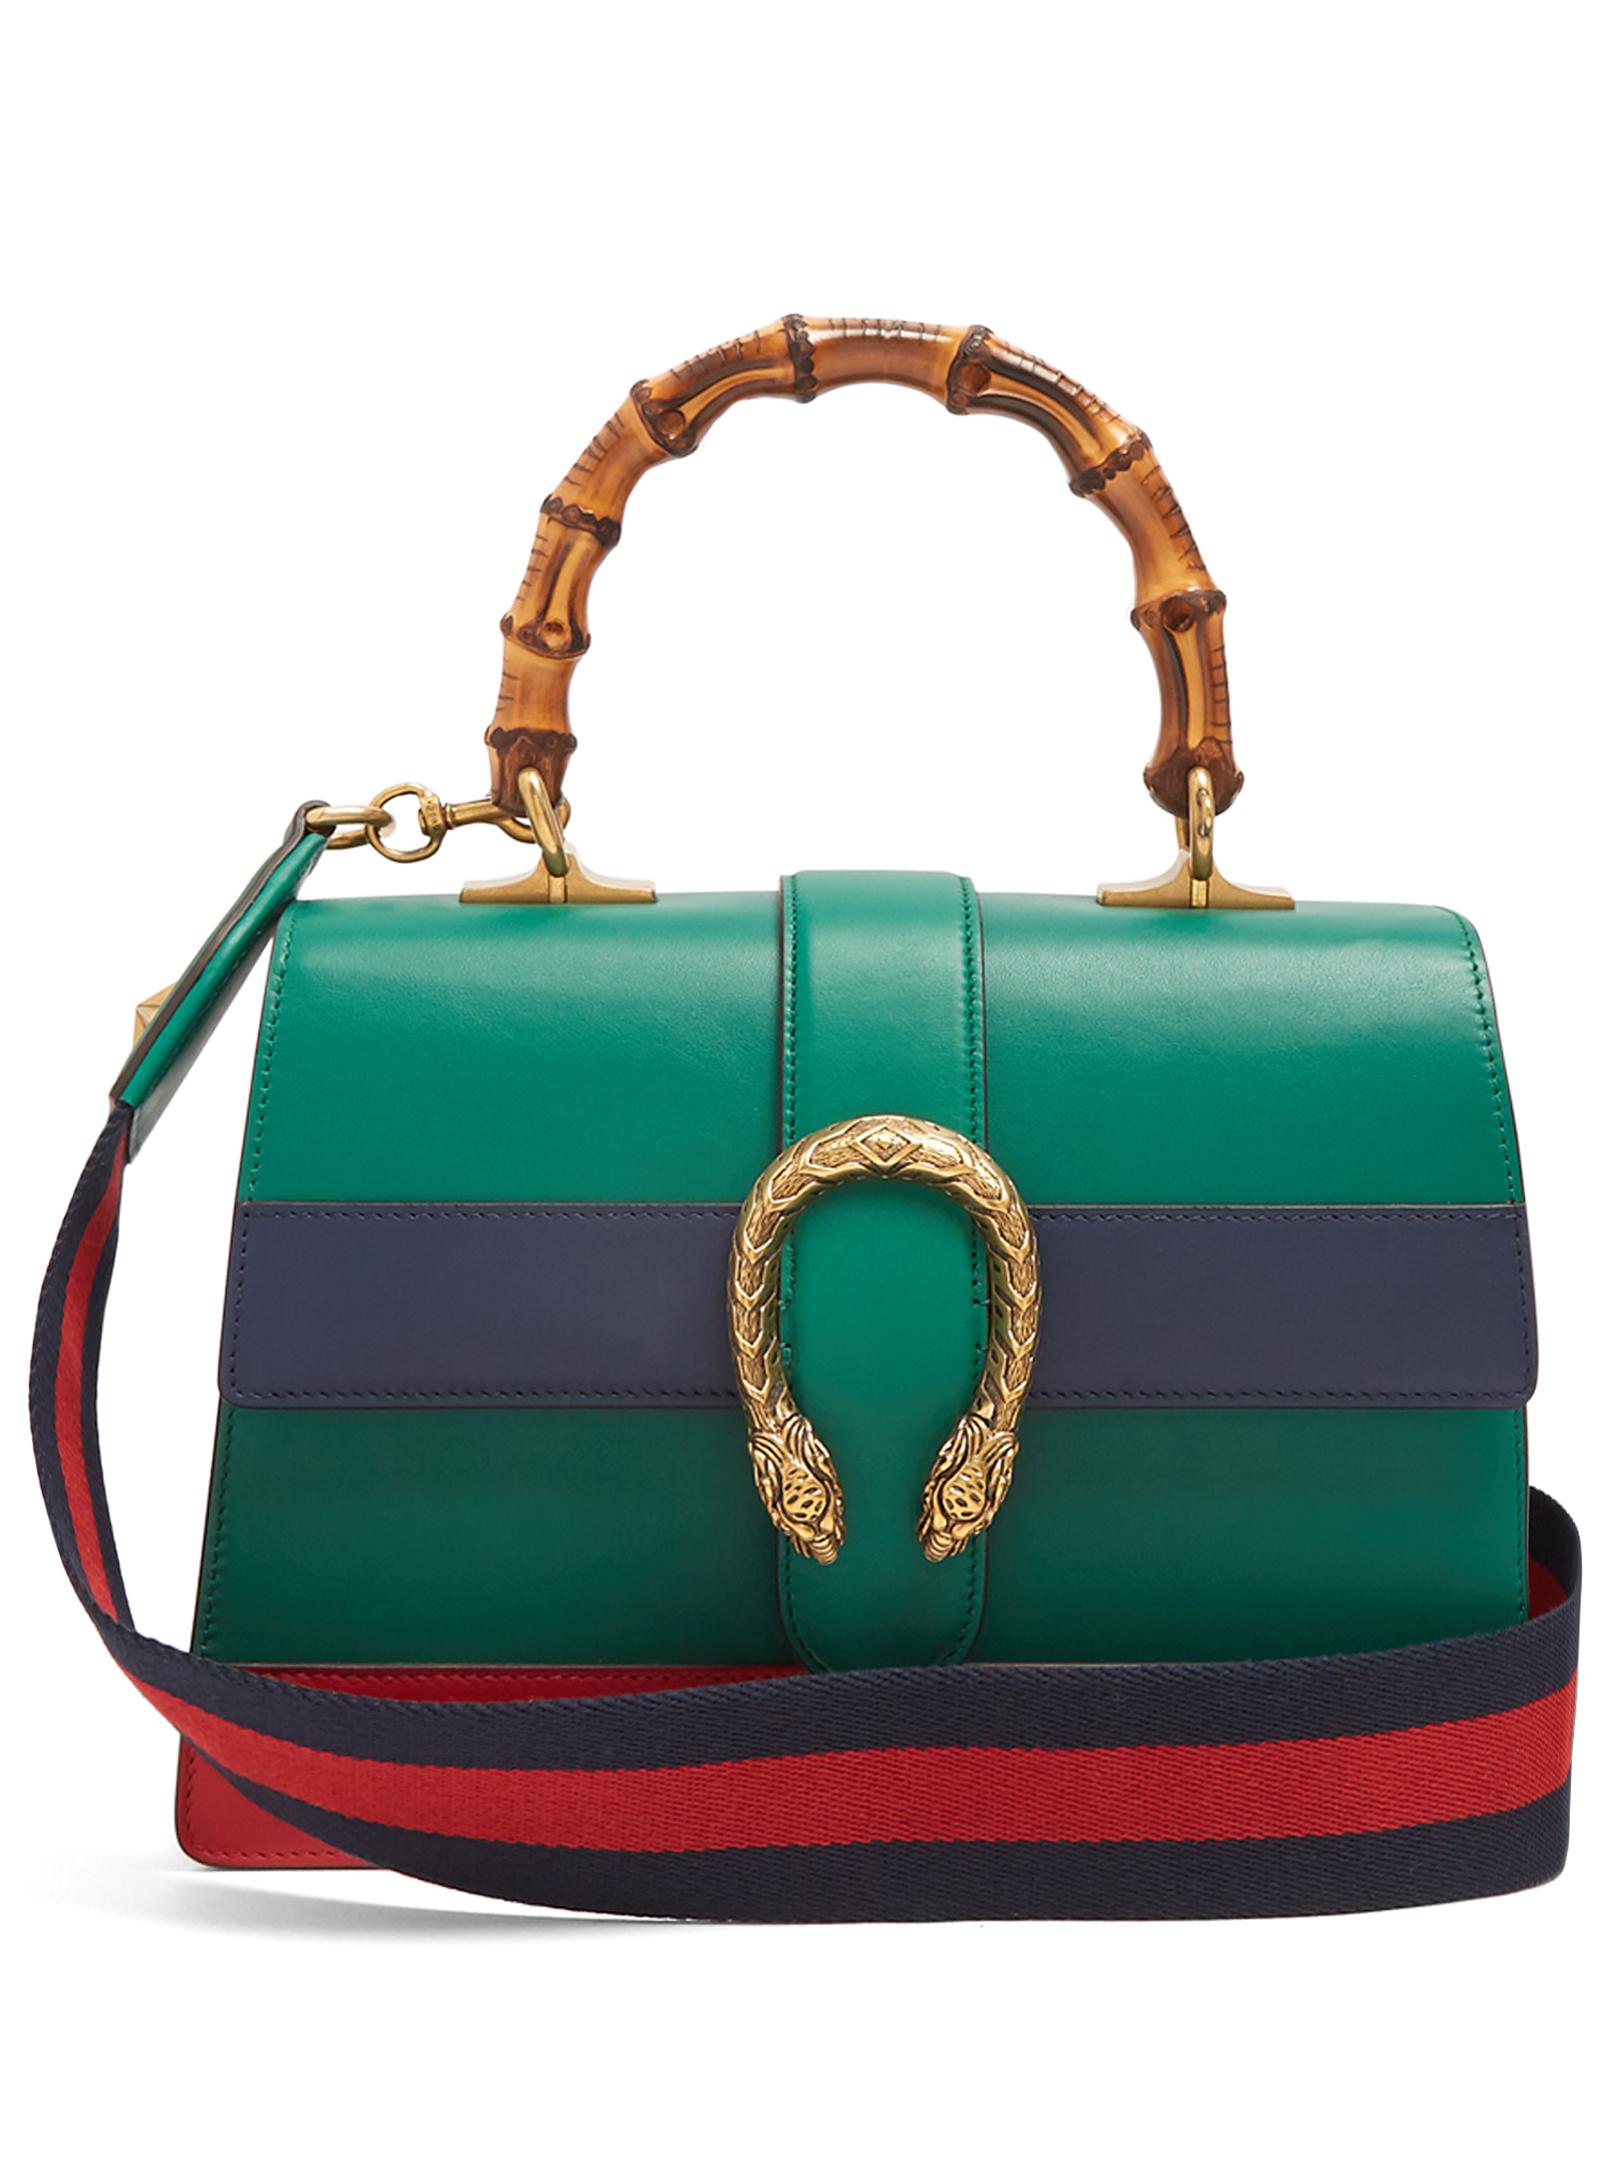 Lyst - Gucci Dionysus Medium Bamboo-handle Leather Bag in Green